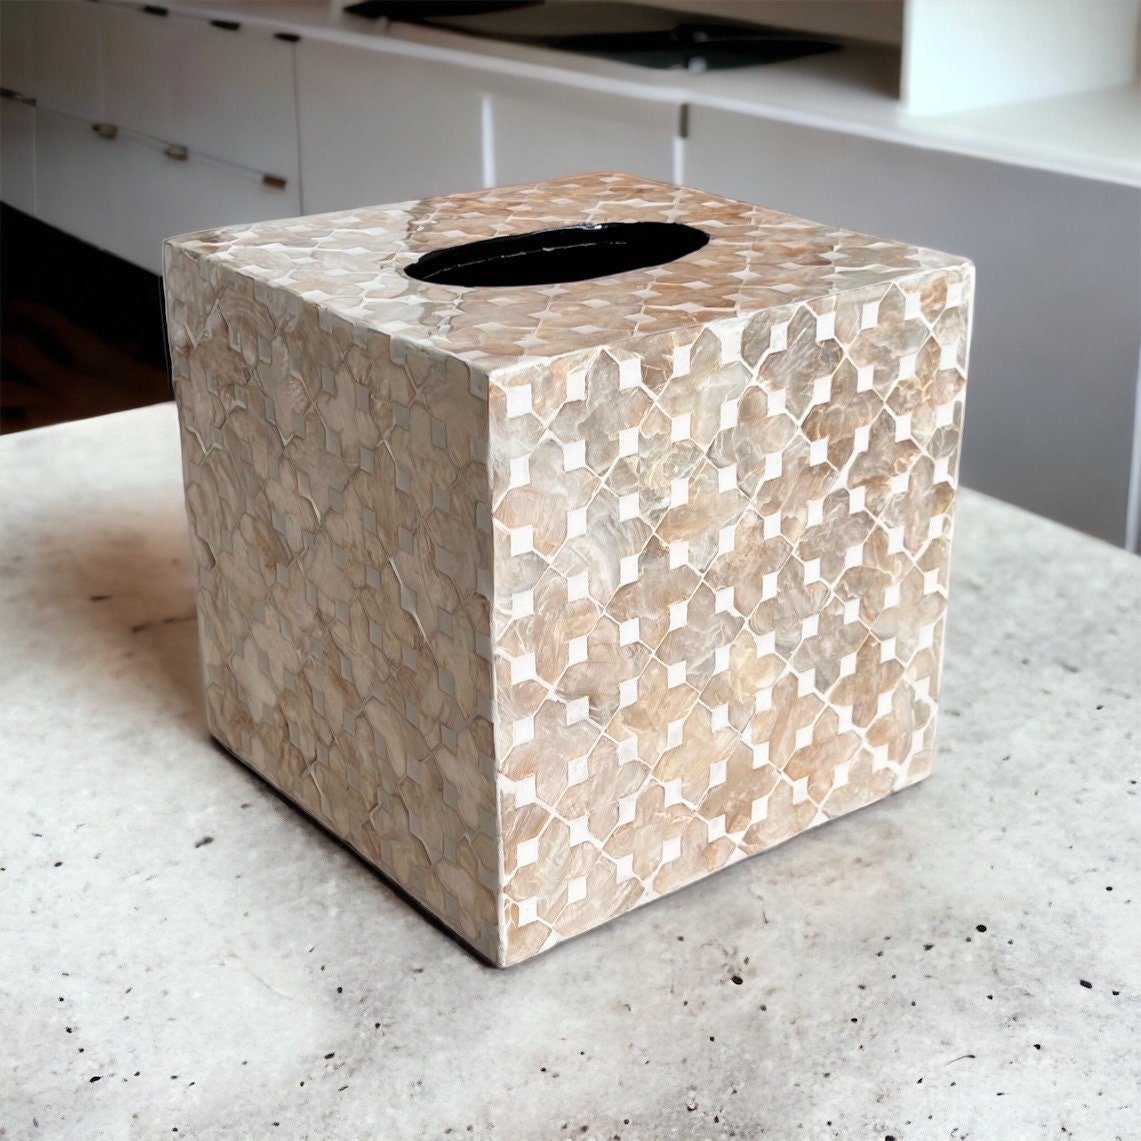 Square tissue box holder with mother of pearl inlay in light gold colorPremiumWoodArt